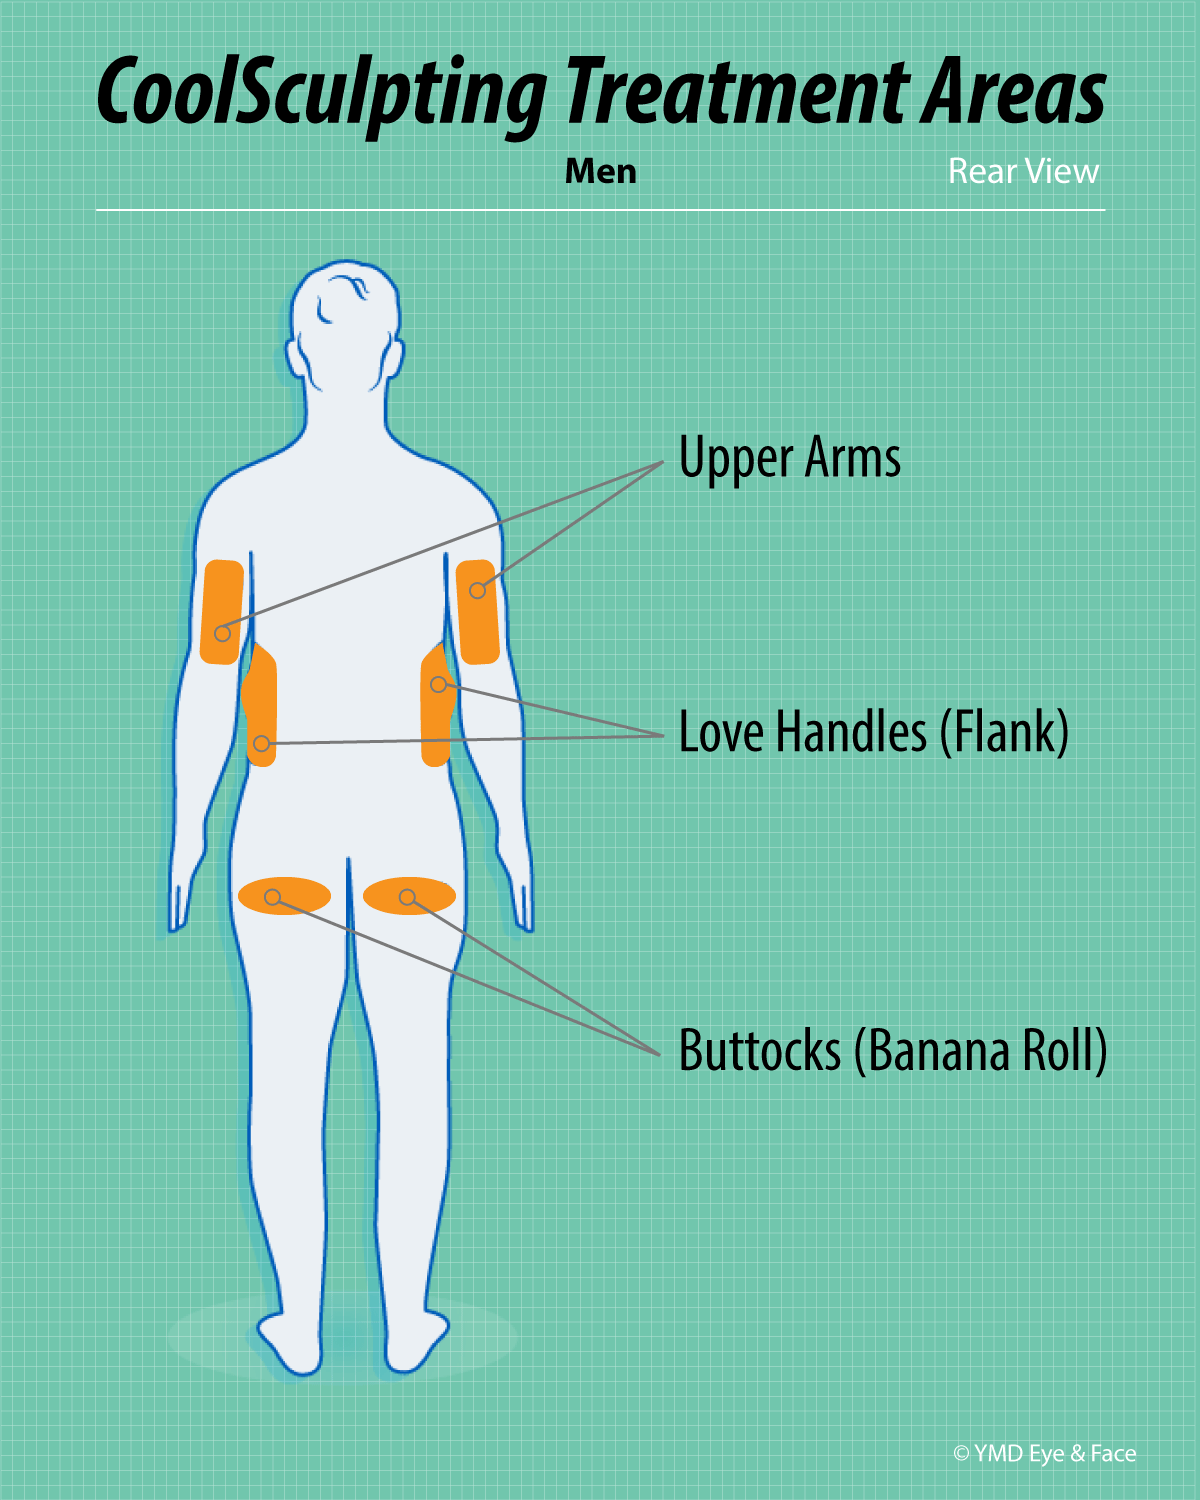 CoolSculpting graphic highlighting possible treatment areas for men (rear view): upper arms, love handles (flanks), buttocks (banana roll)